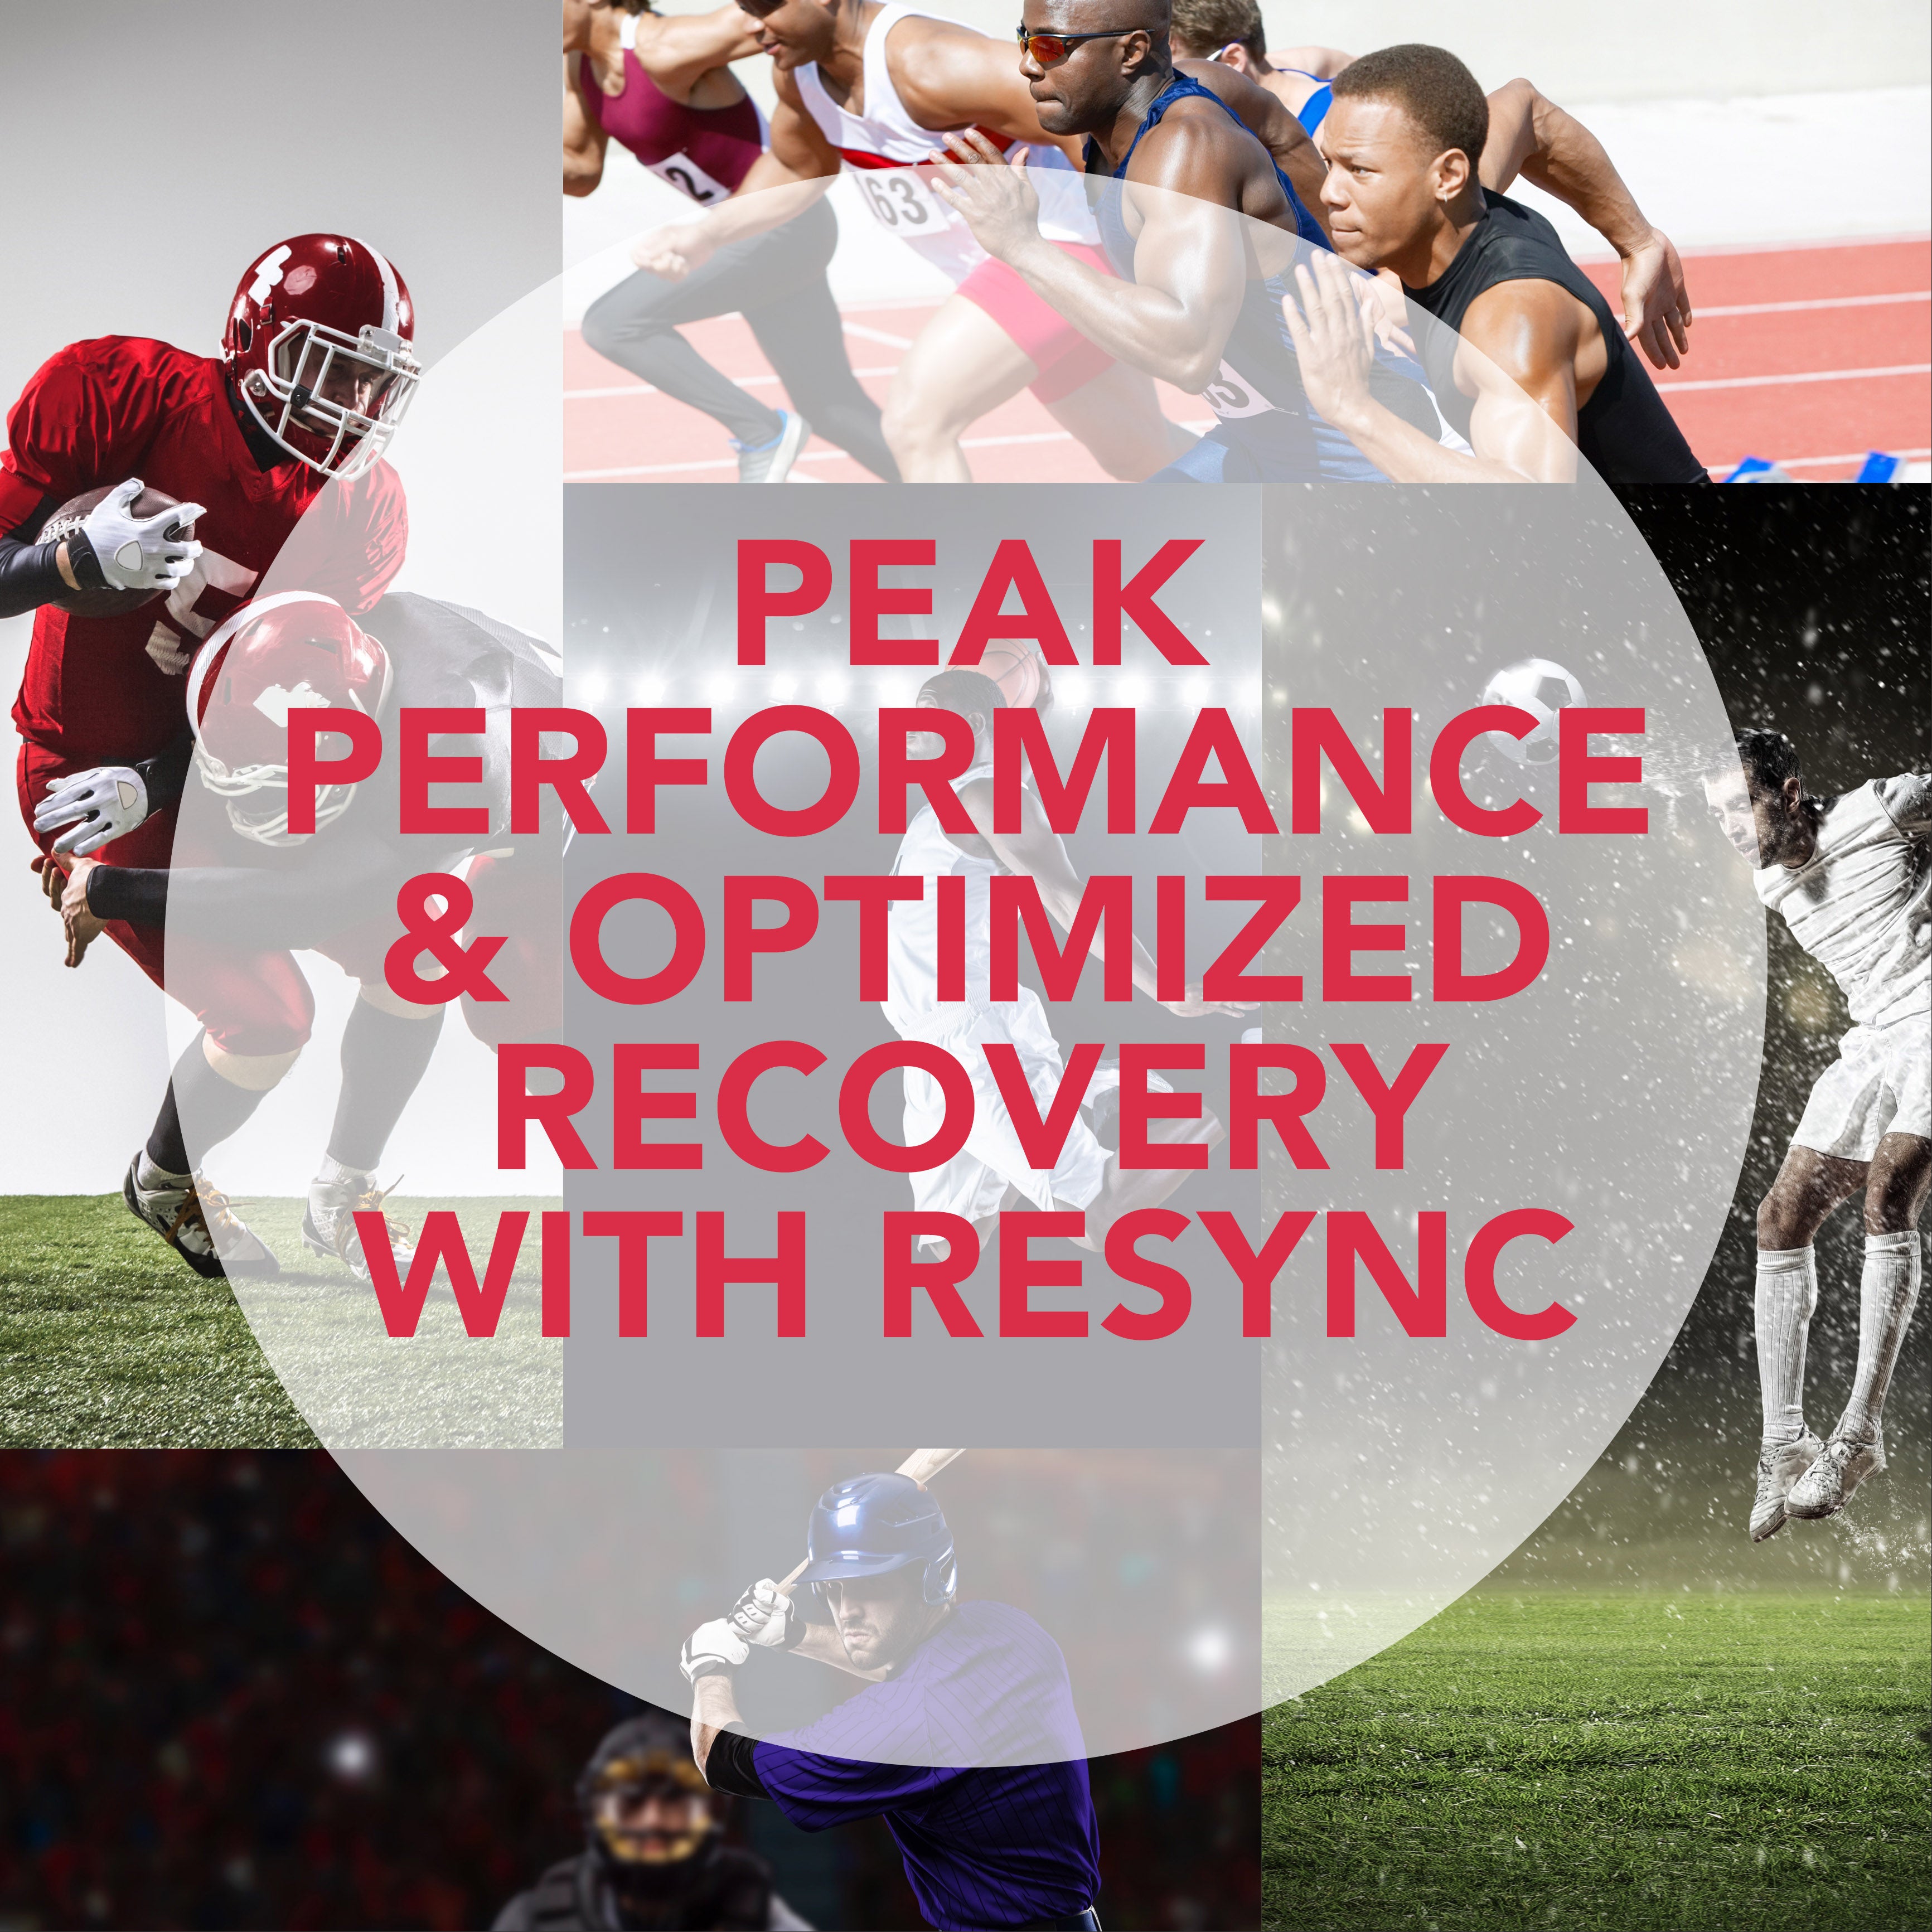 Peak Performance & Optimized Recovery with Resync